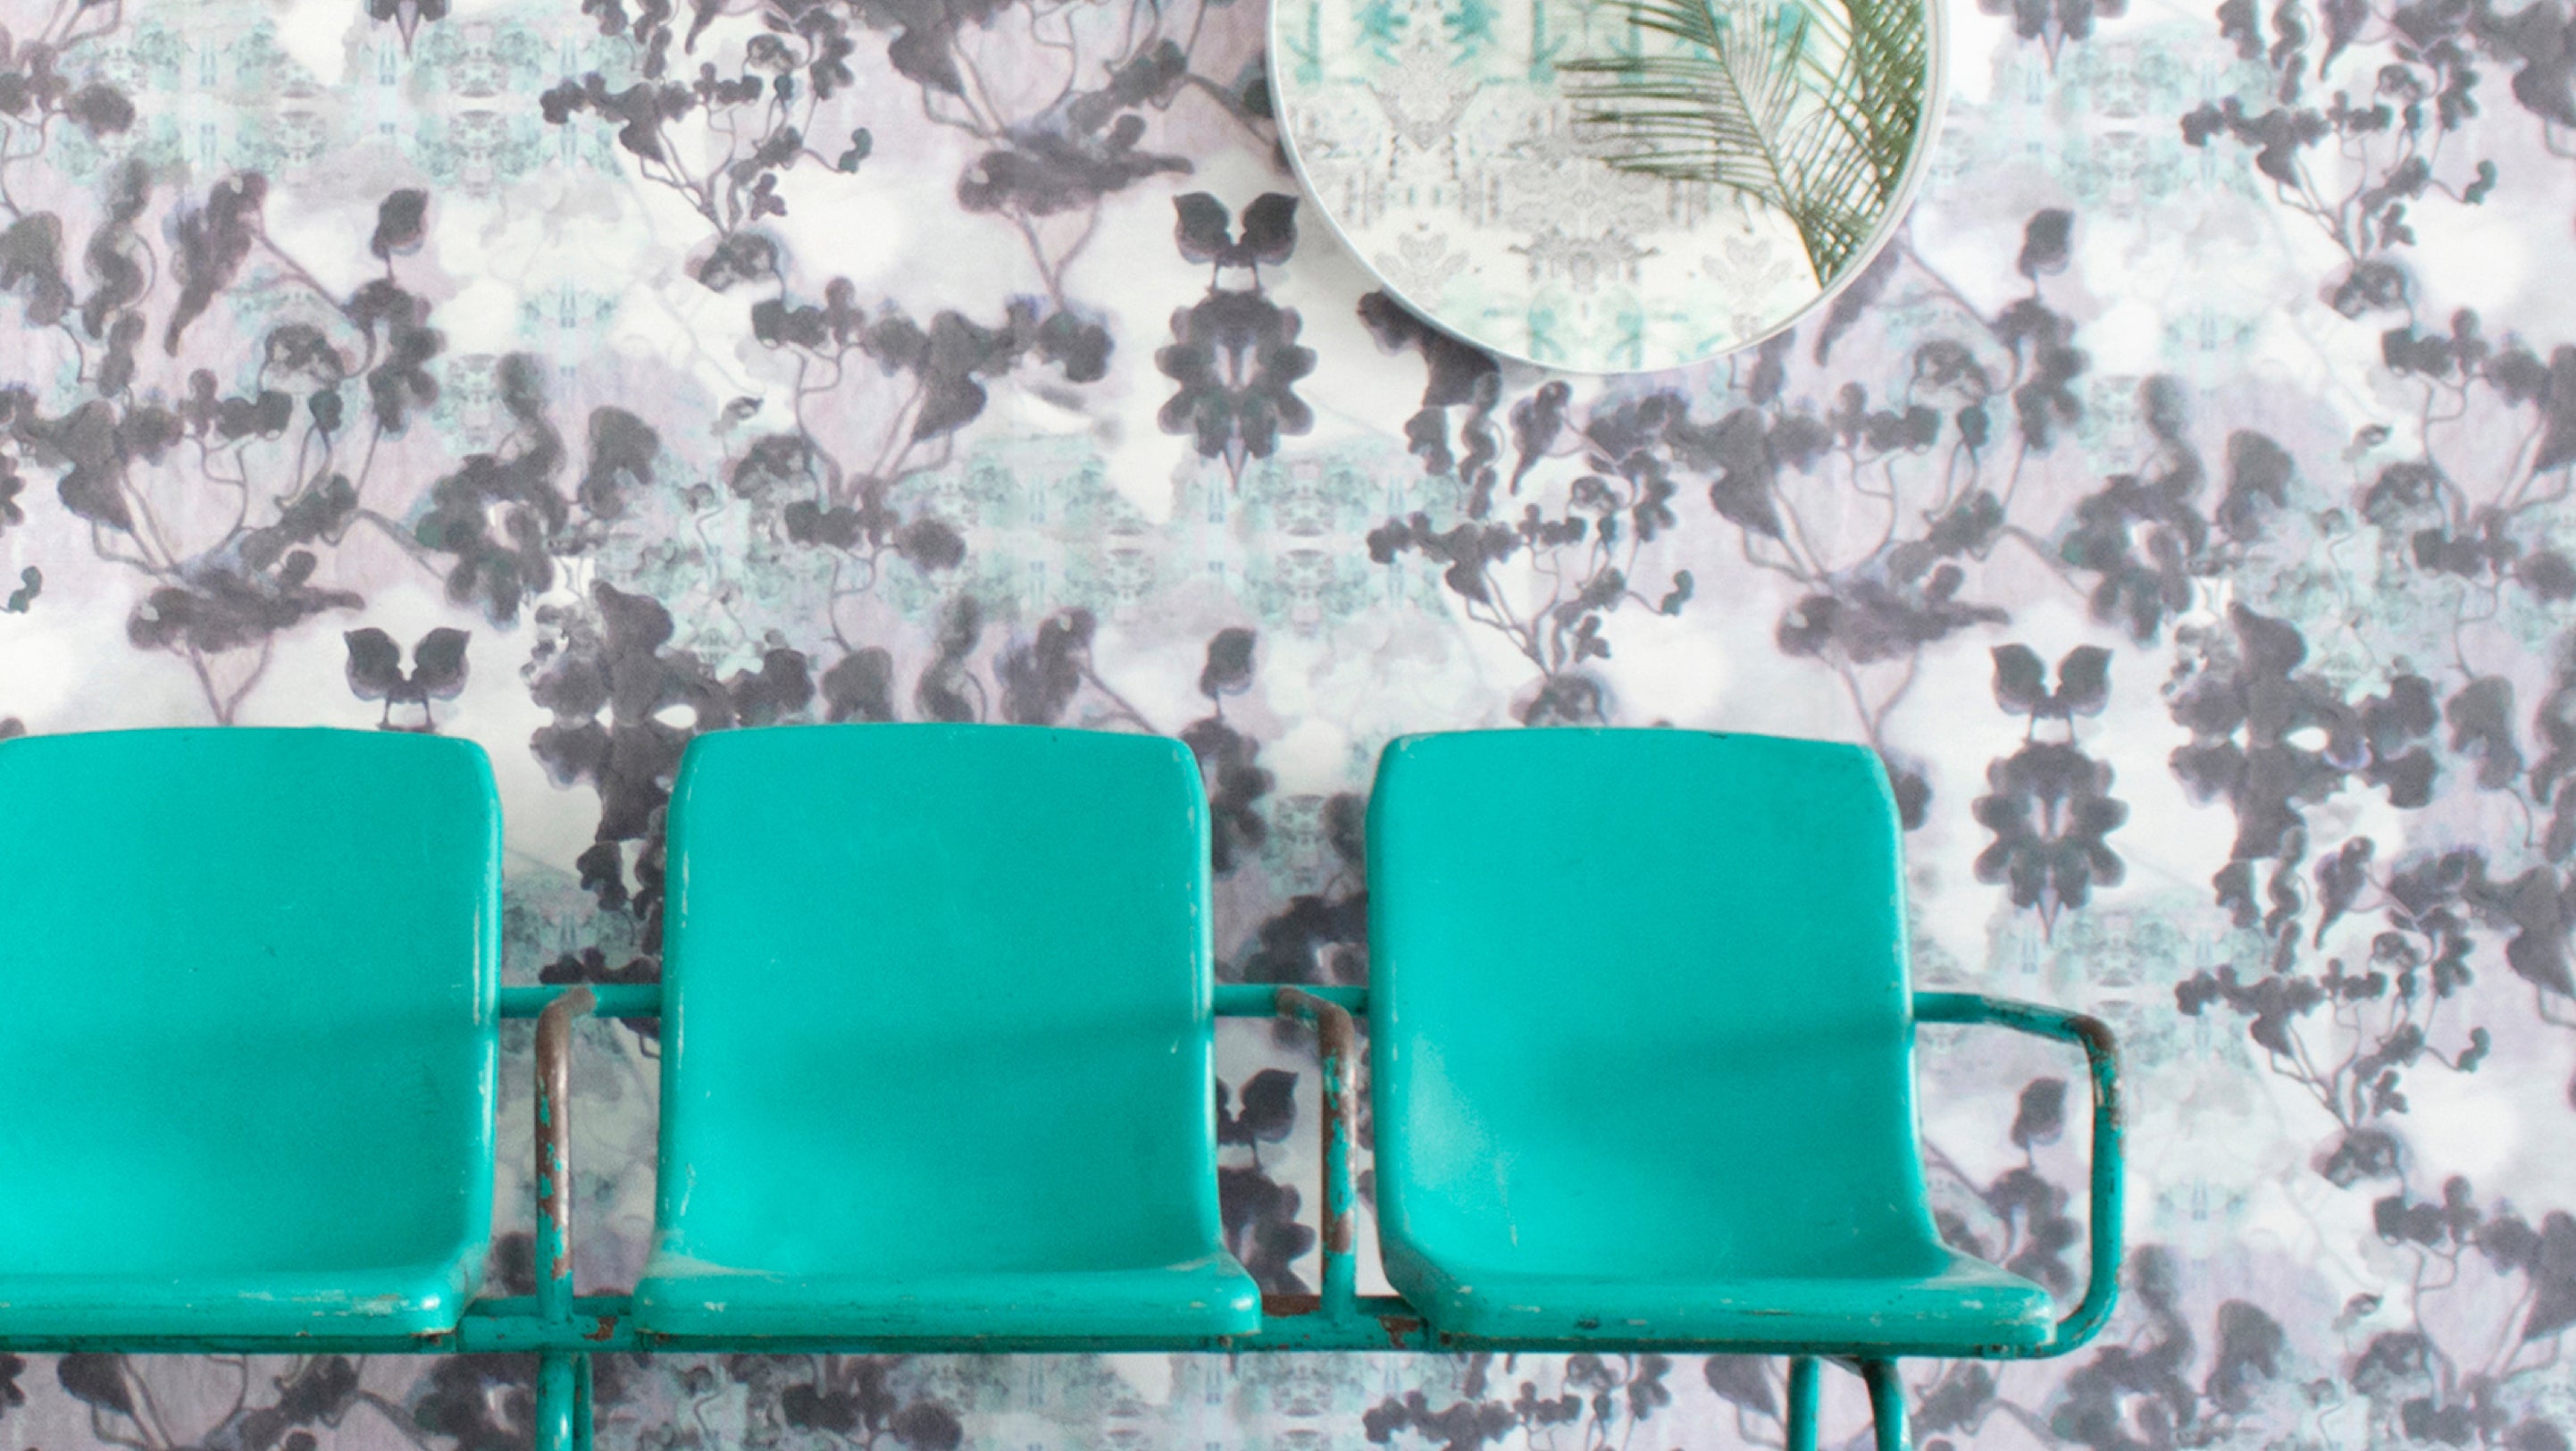 A row of chairs in front of a wall with a floral pattern